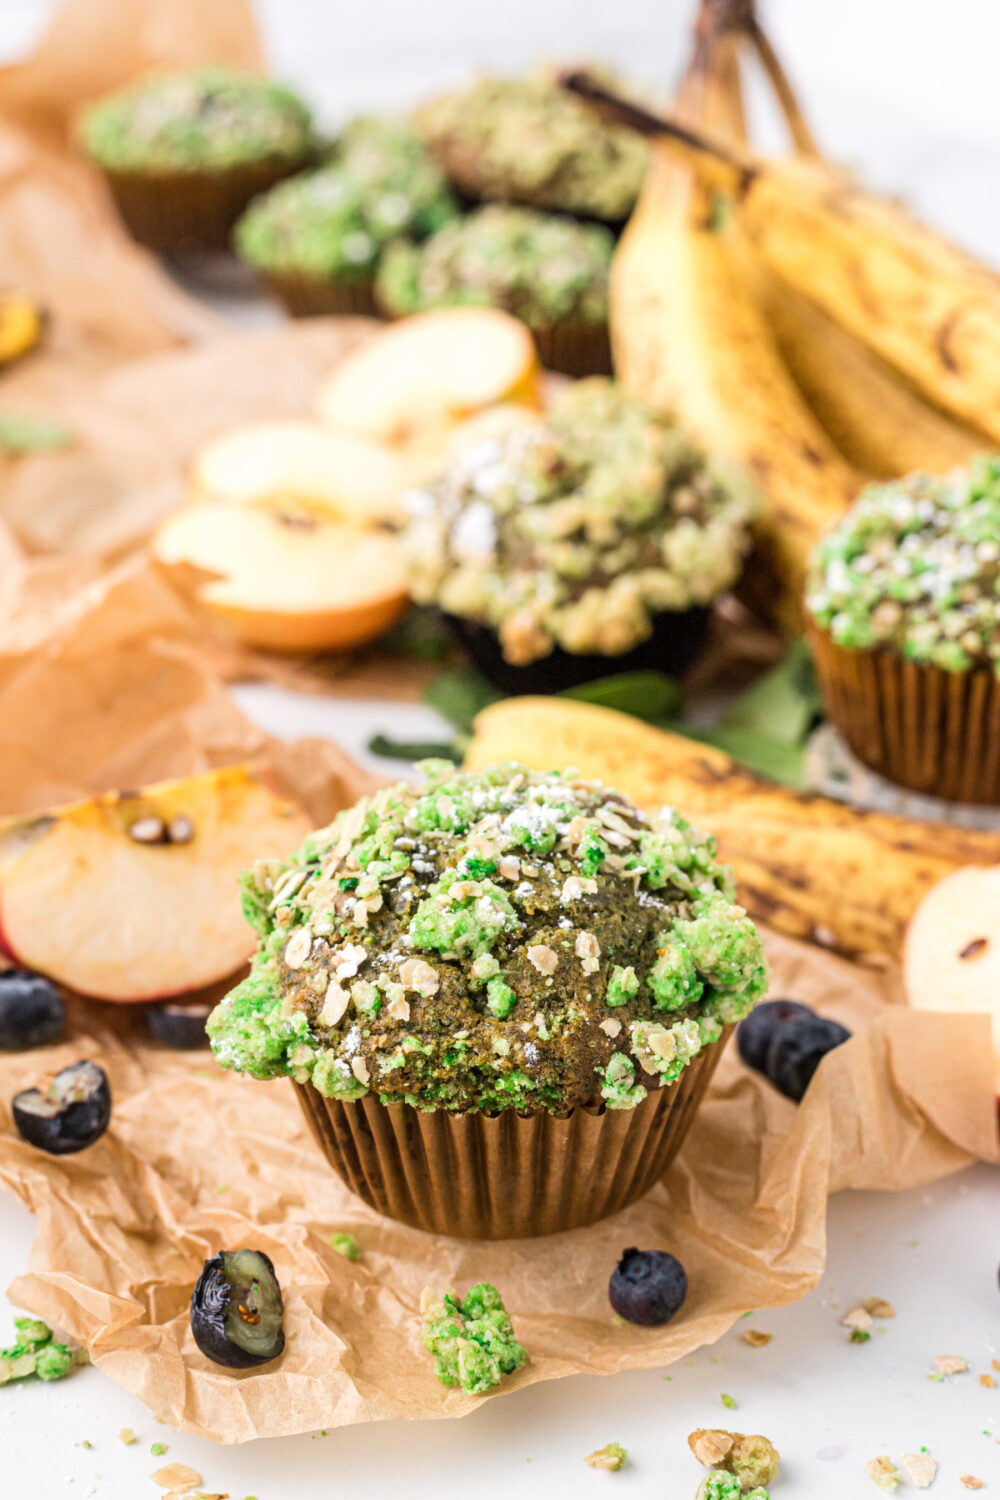 Green muffins surrounded by bananas and blueberries.